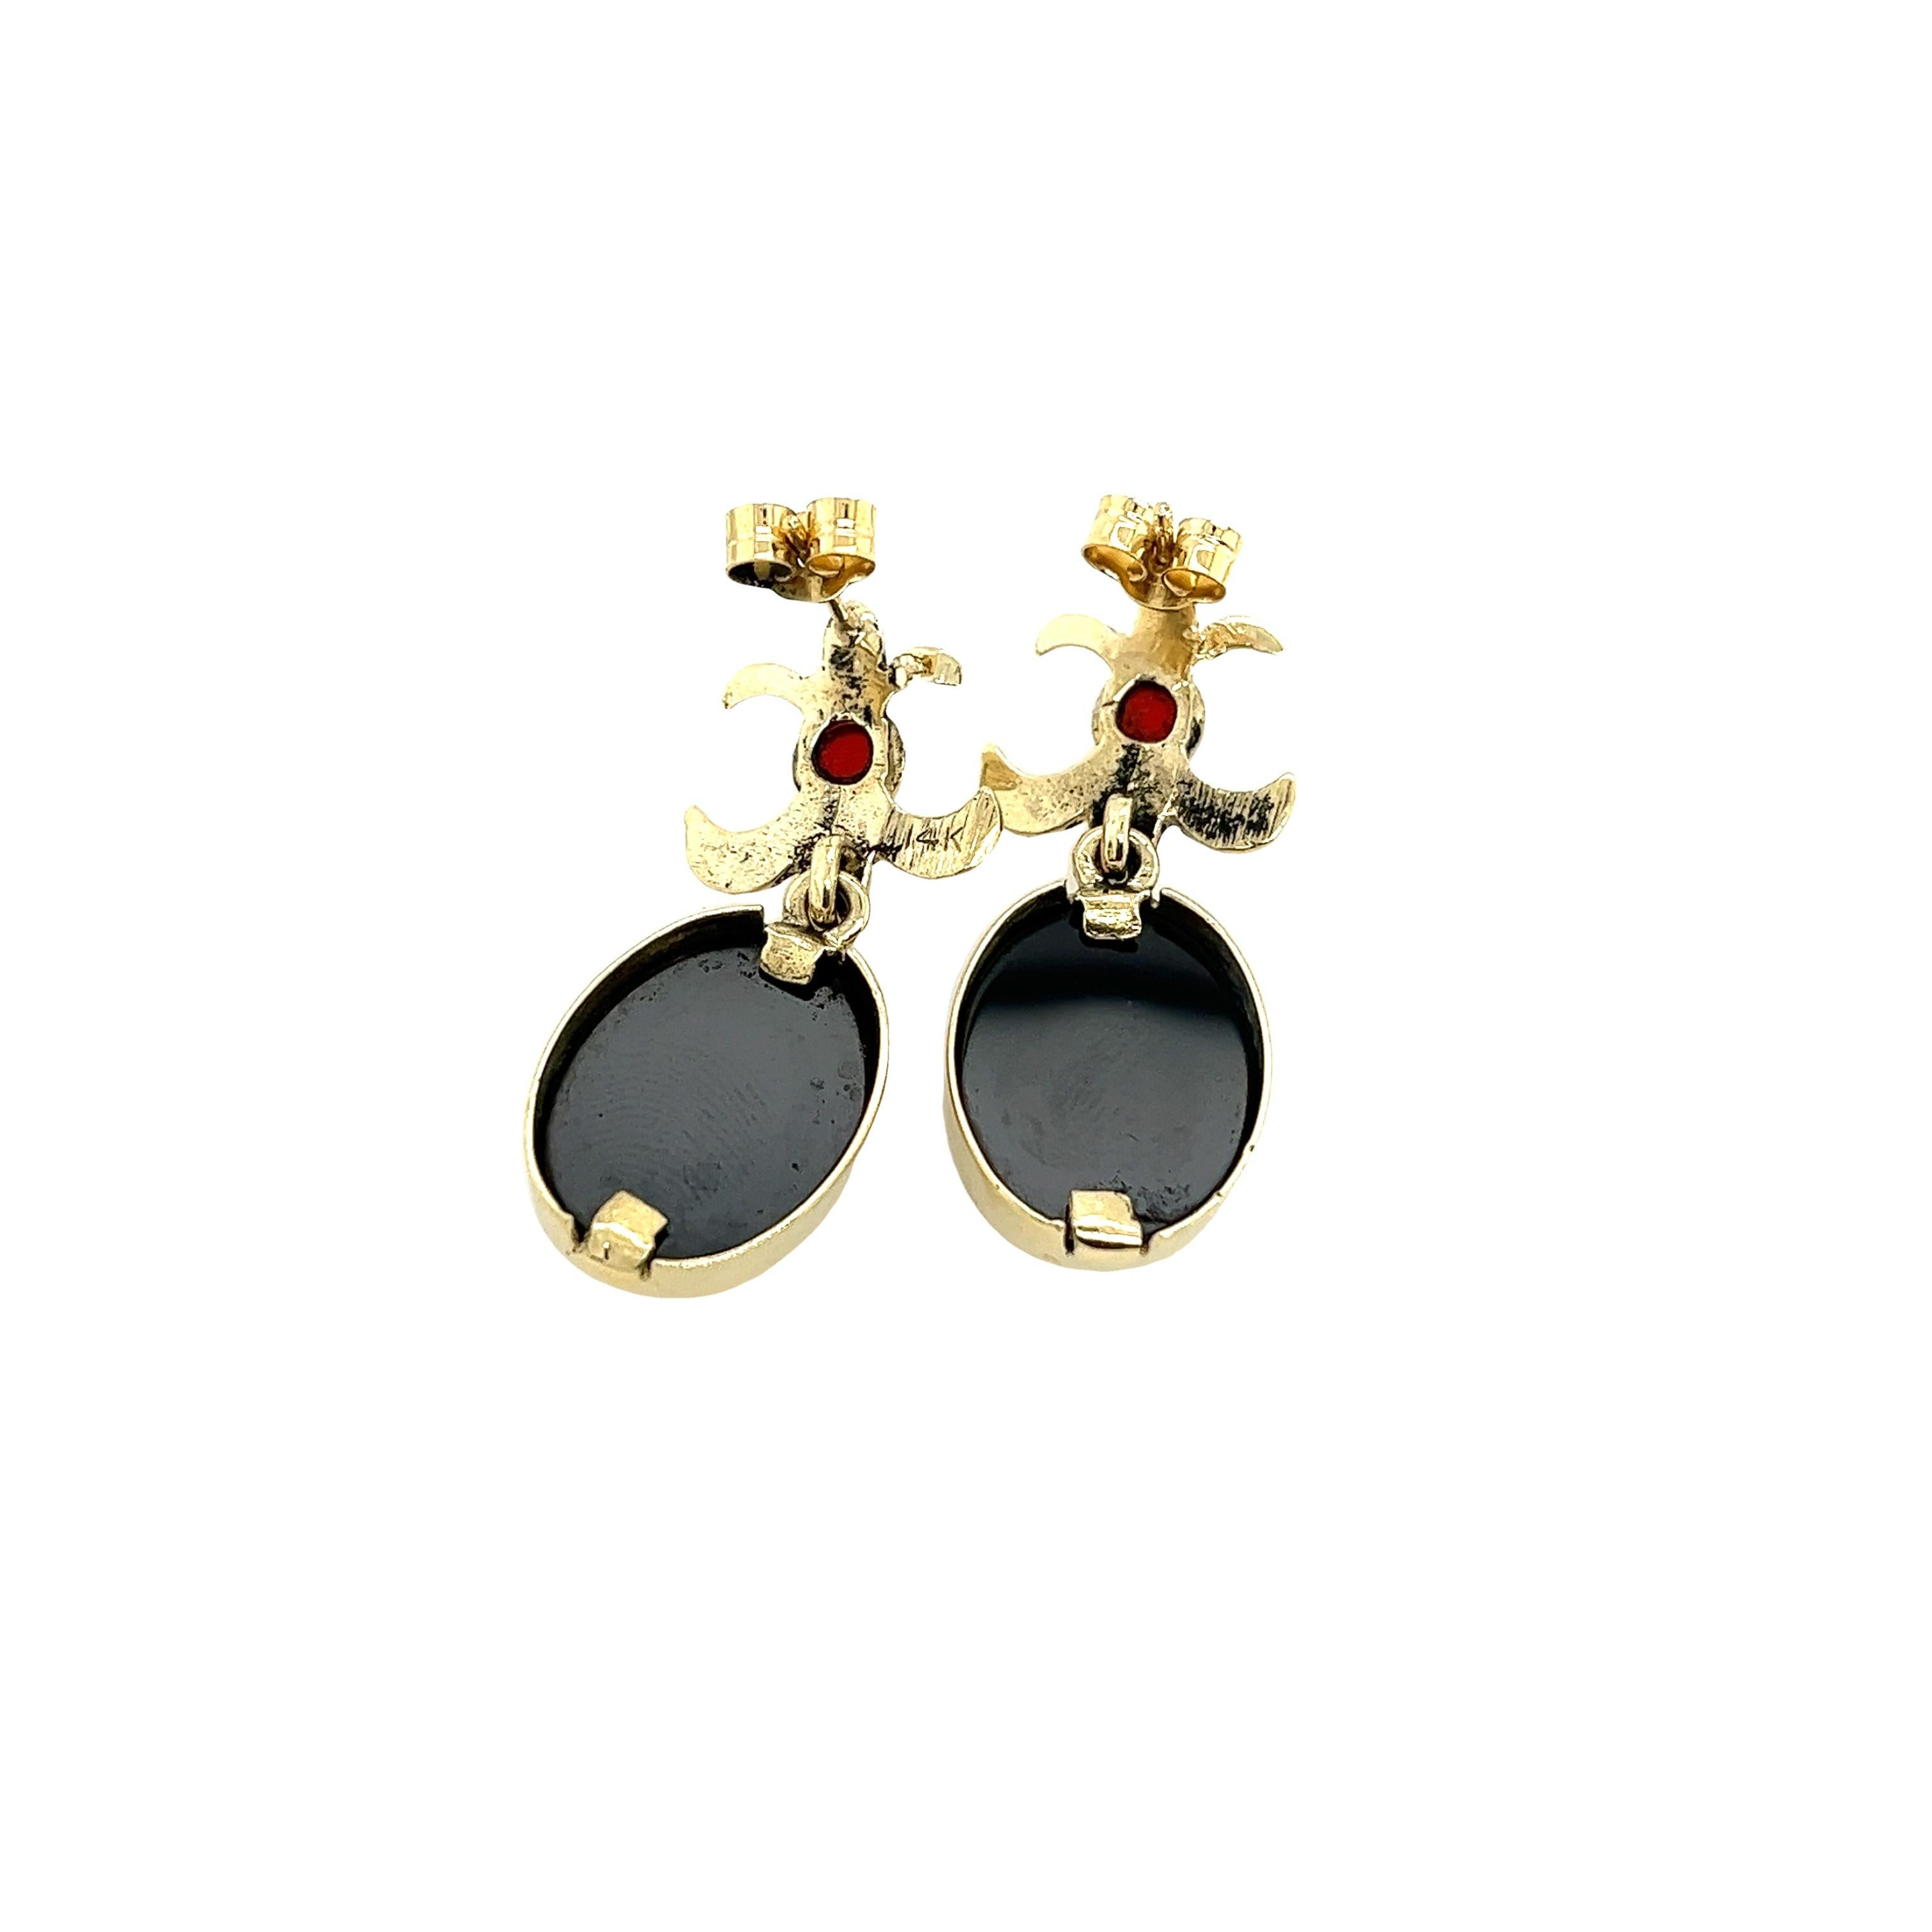 This vintage pair of drop earrings are made with 2 hematite carved onyx & 2 cabochon natural garnets,
They are mounted in 14ct yellow gold. 
Total Weight: 6.3g 
Earrings Dimension: 32mm x 13mm
Peg & Screw Fittings
SMS8622